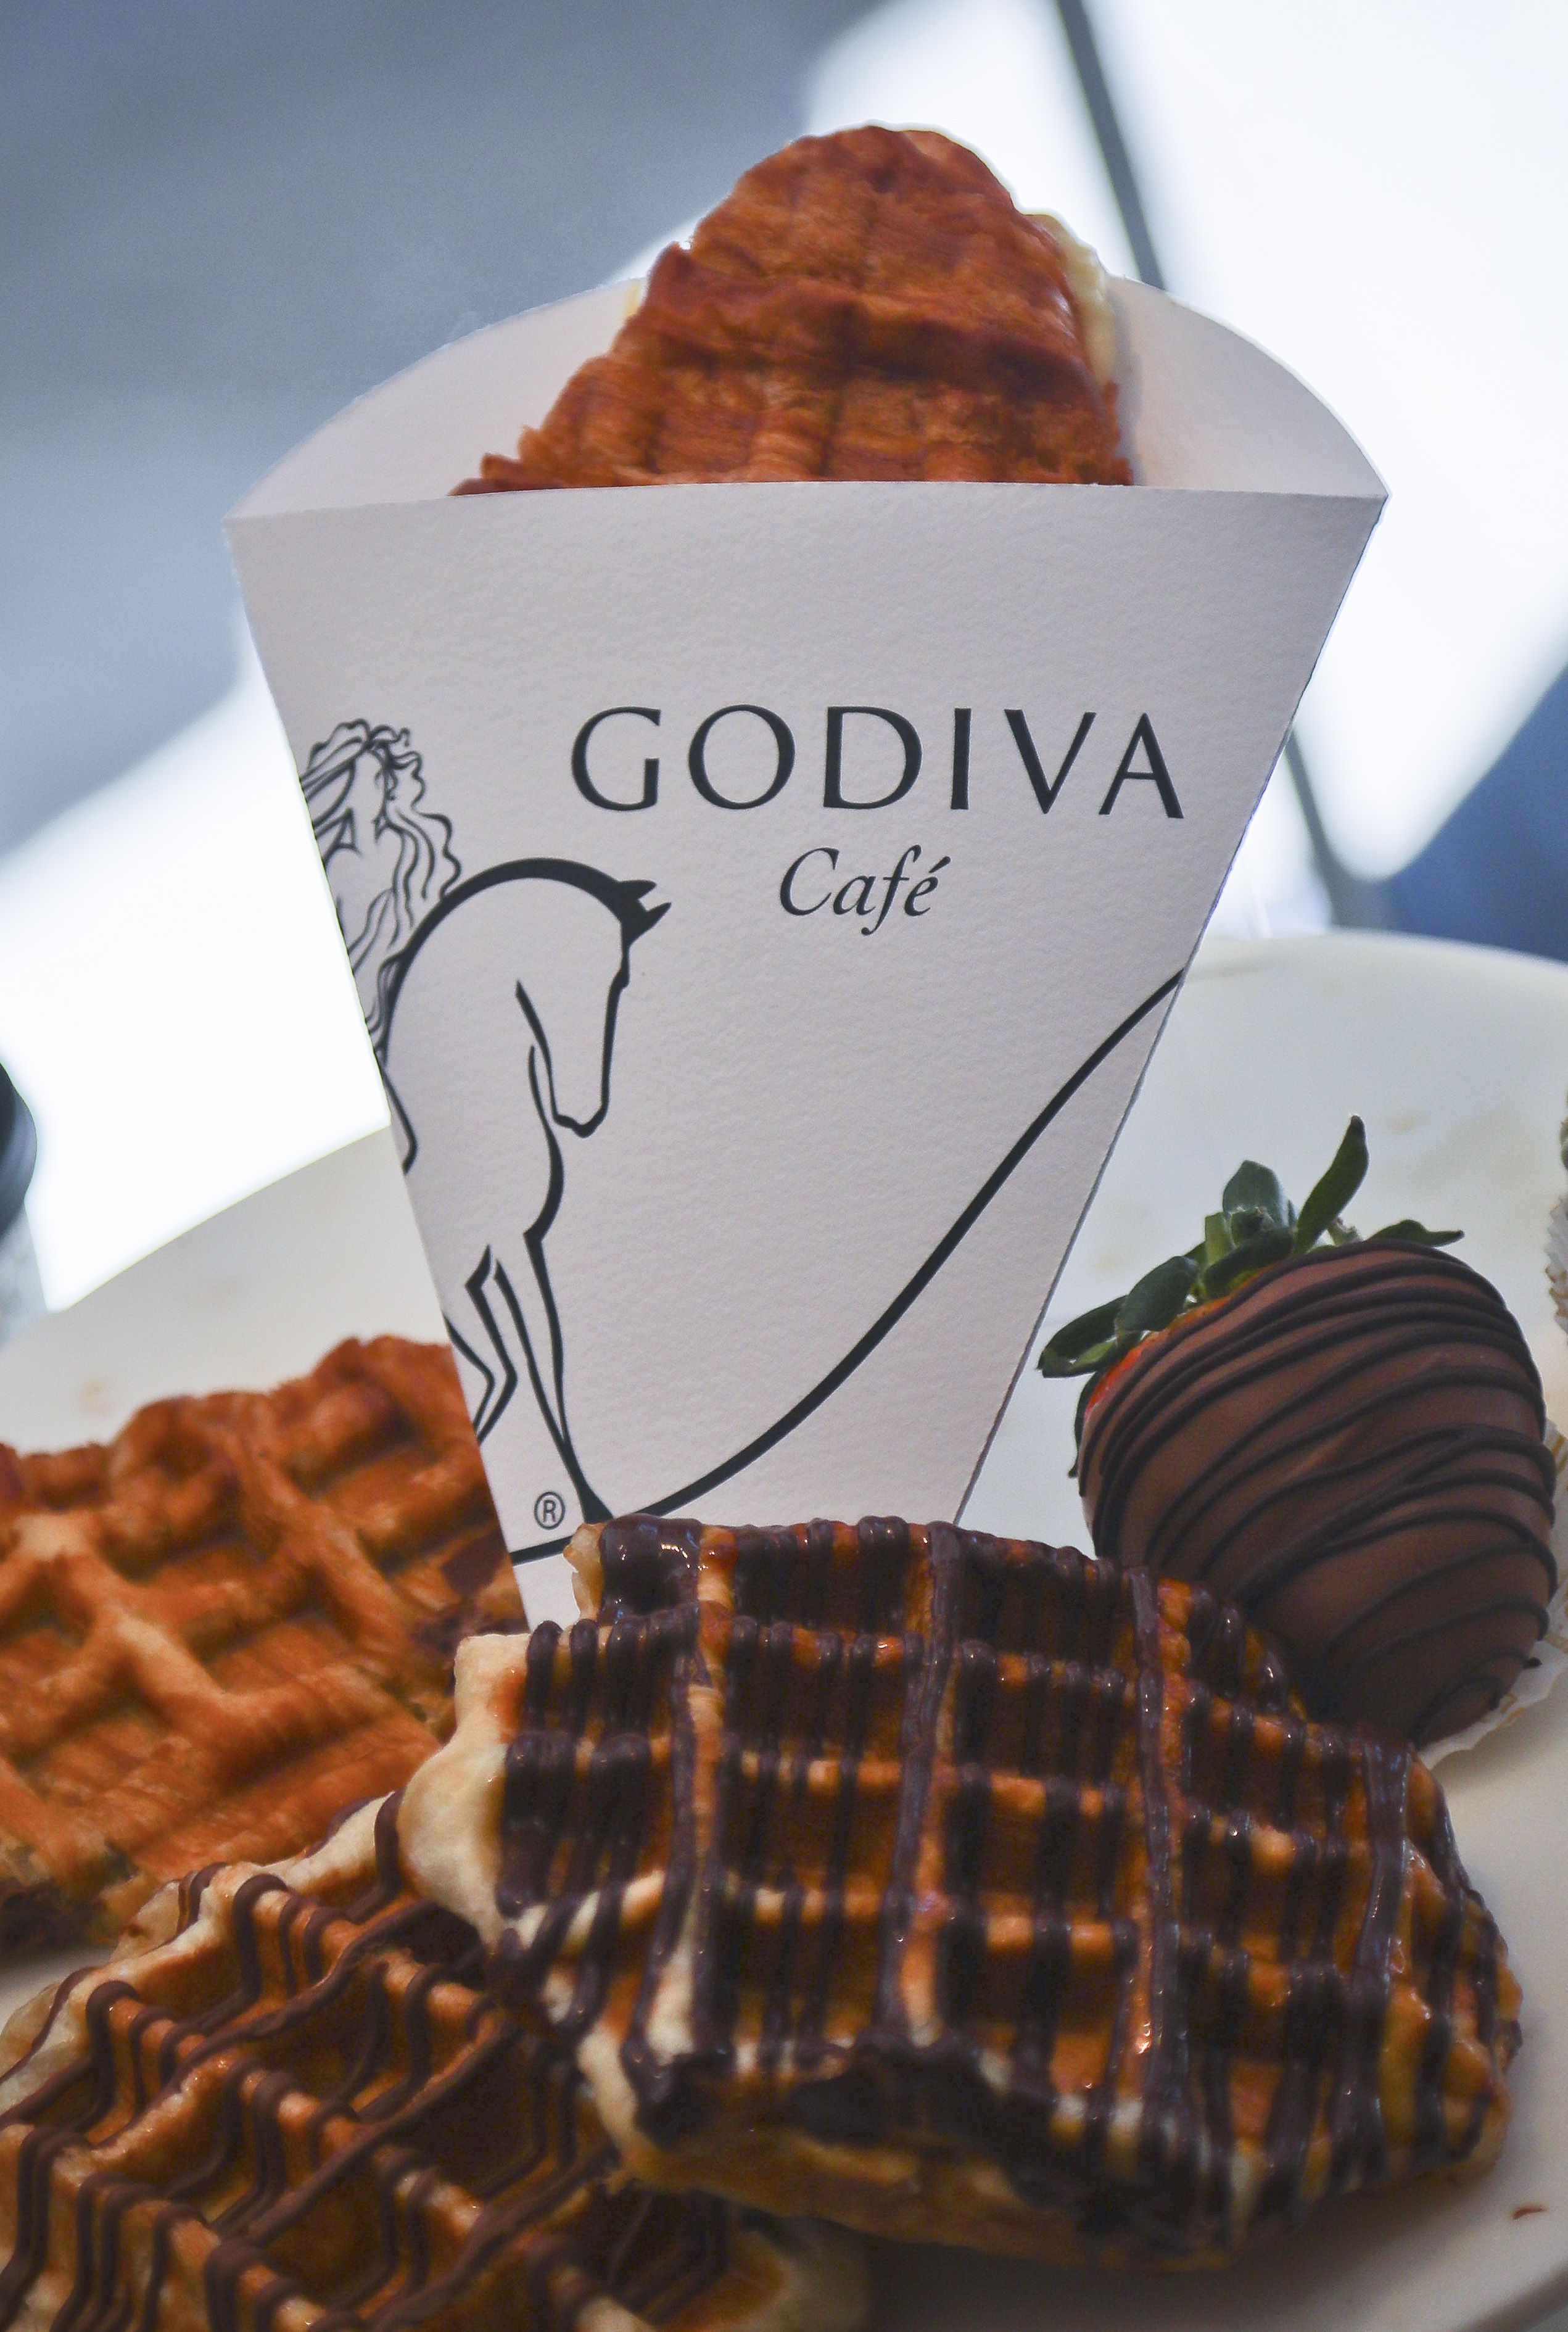 Godiva moves beyond chocolate to open 2,000 cafes